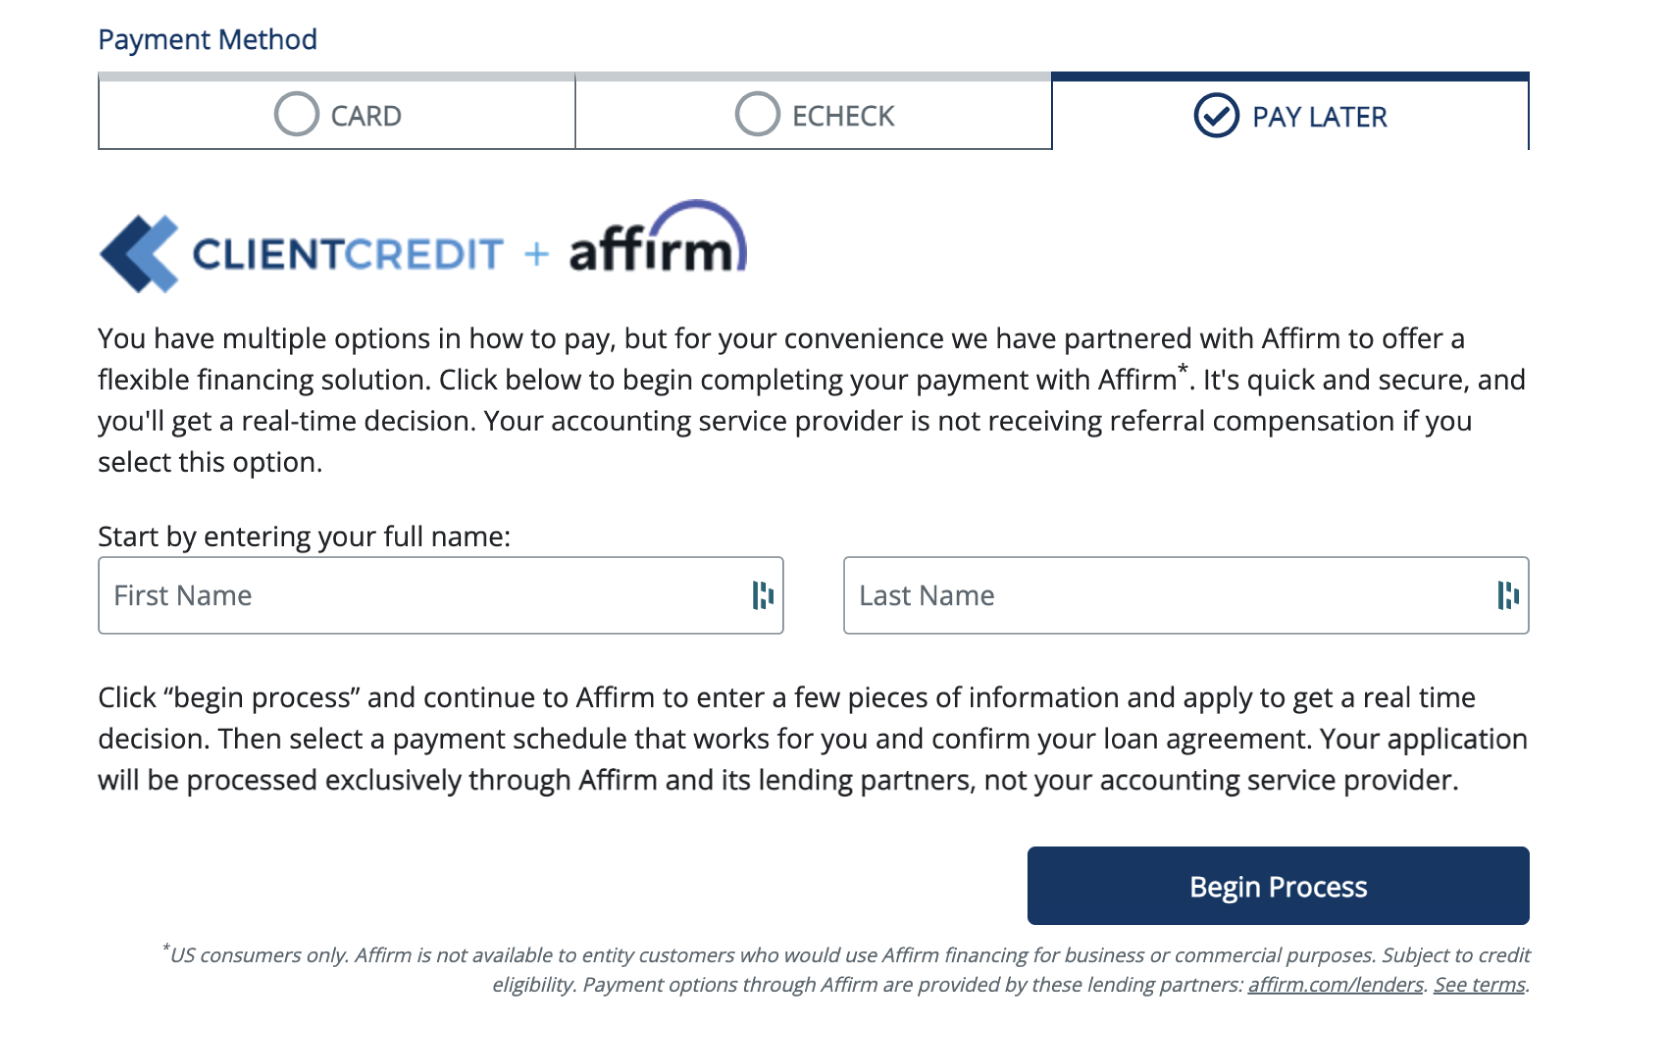 ClientCredit payment option alongside card and eCheck on the client's payment page